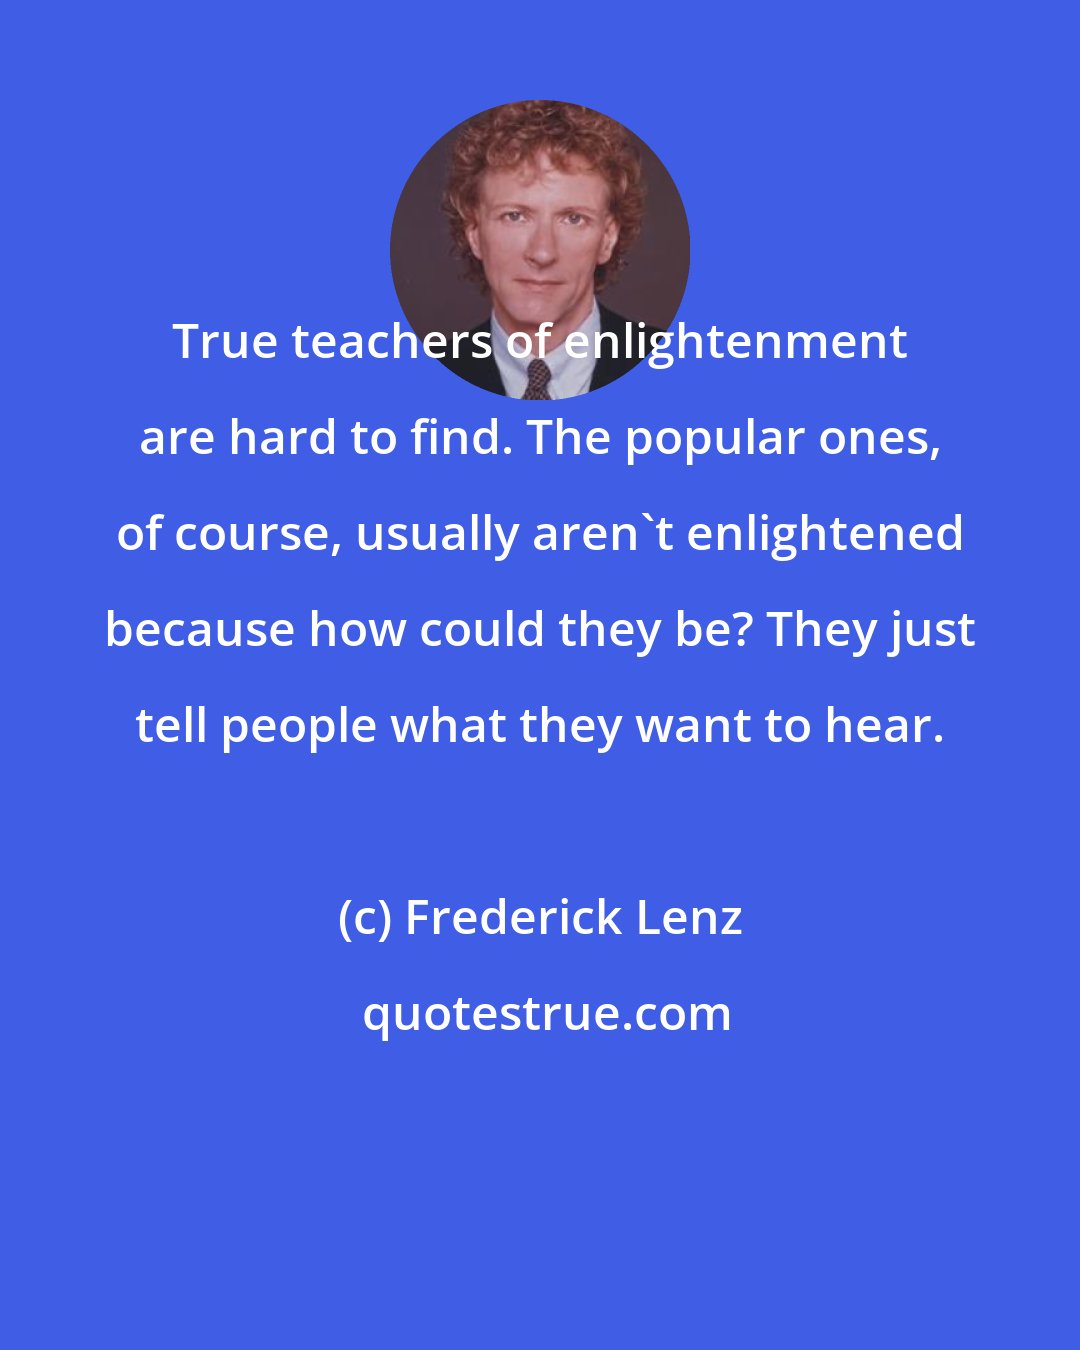 Frederick Lenz: True teachers of enlightenment are hard to find. The popular ones, of course, usually aren't enlightened because how could they be? They just tell people what they want to hear.